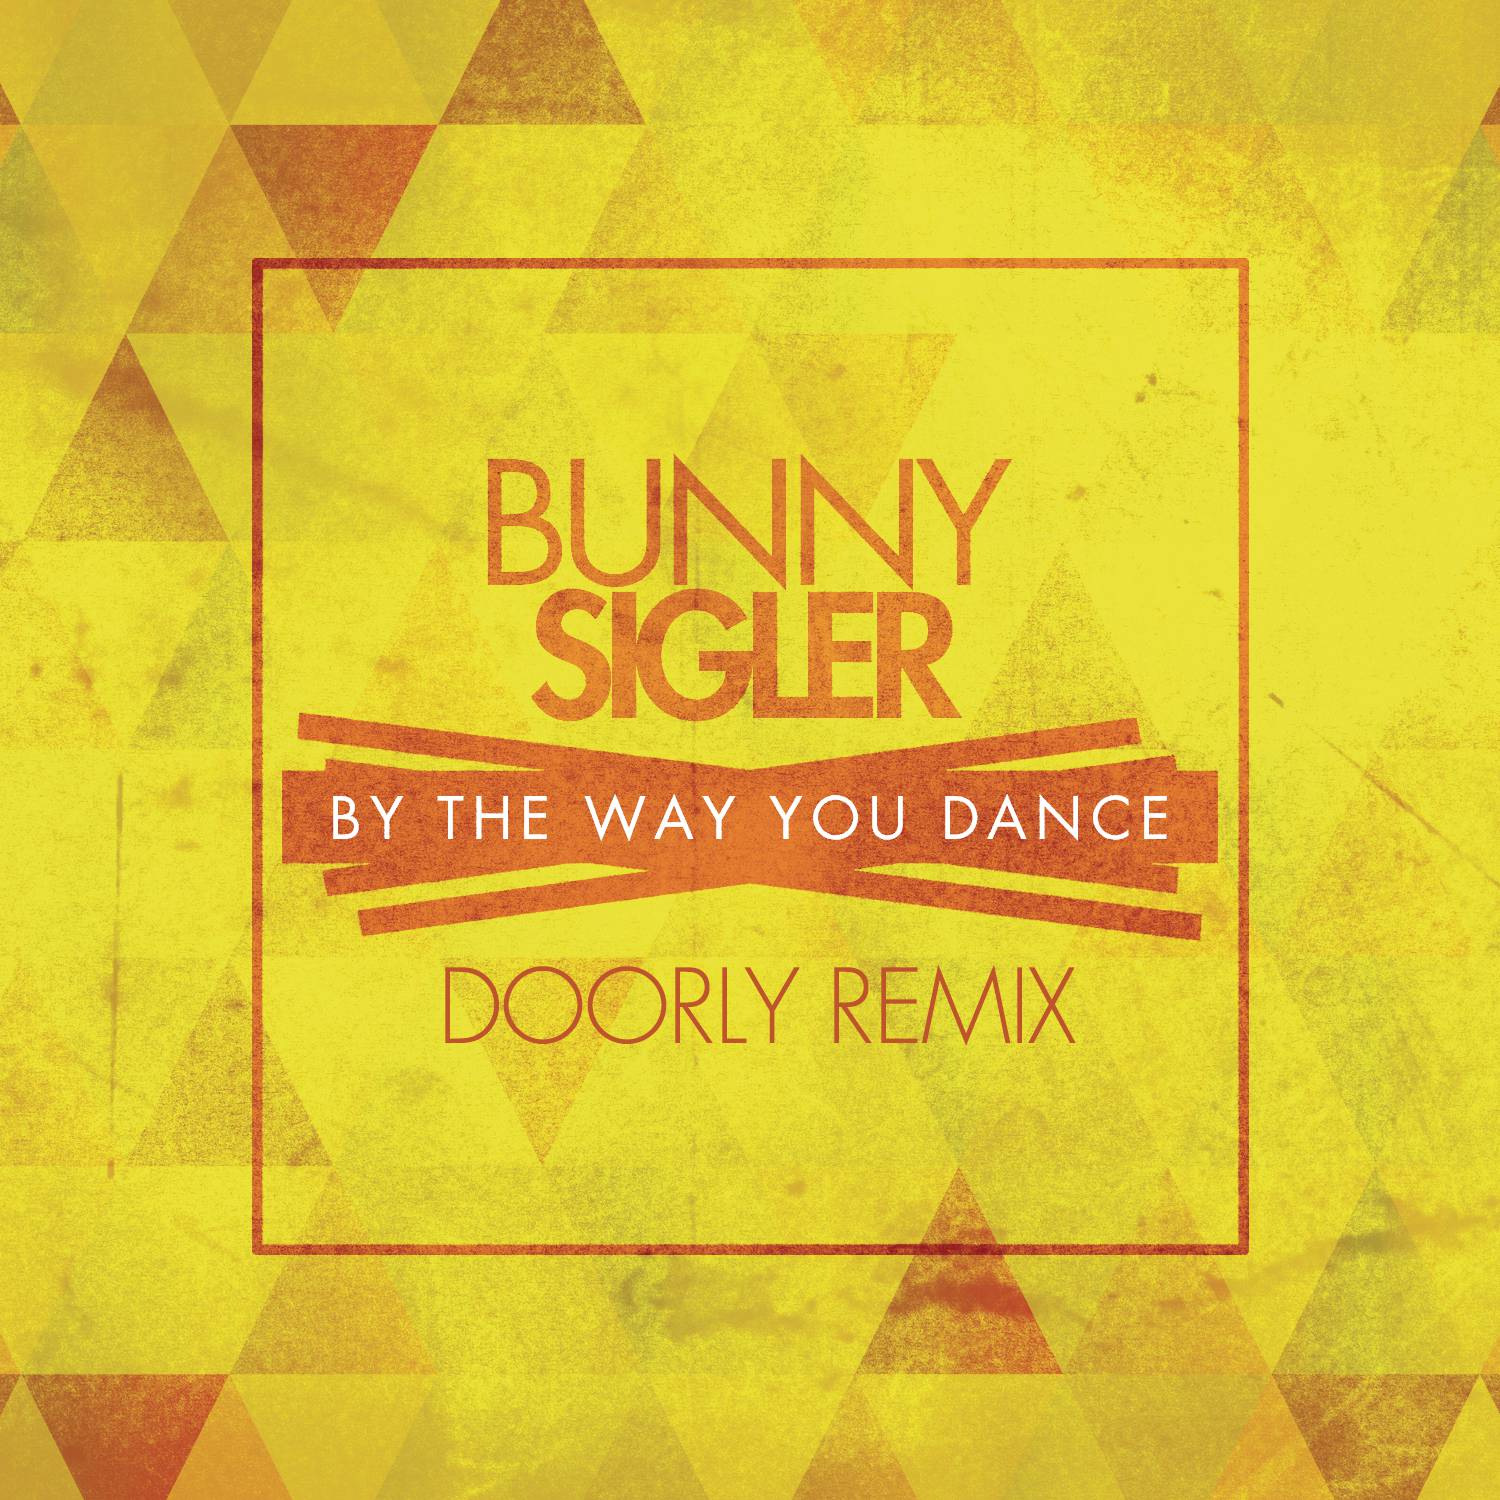 By The Way You Dance (Doorly Remix)